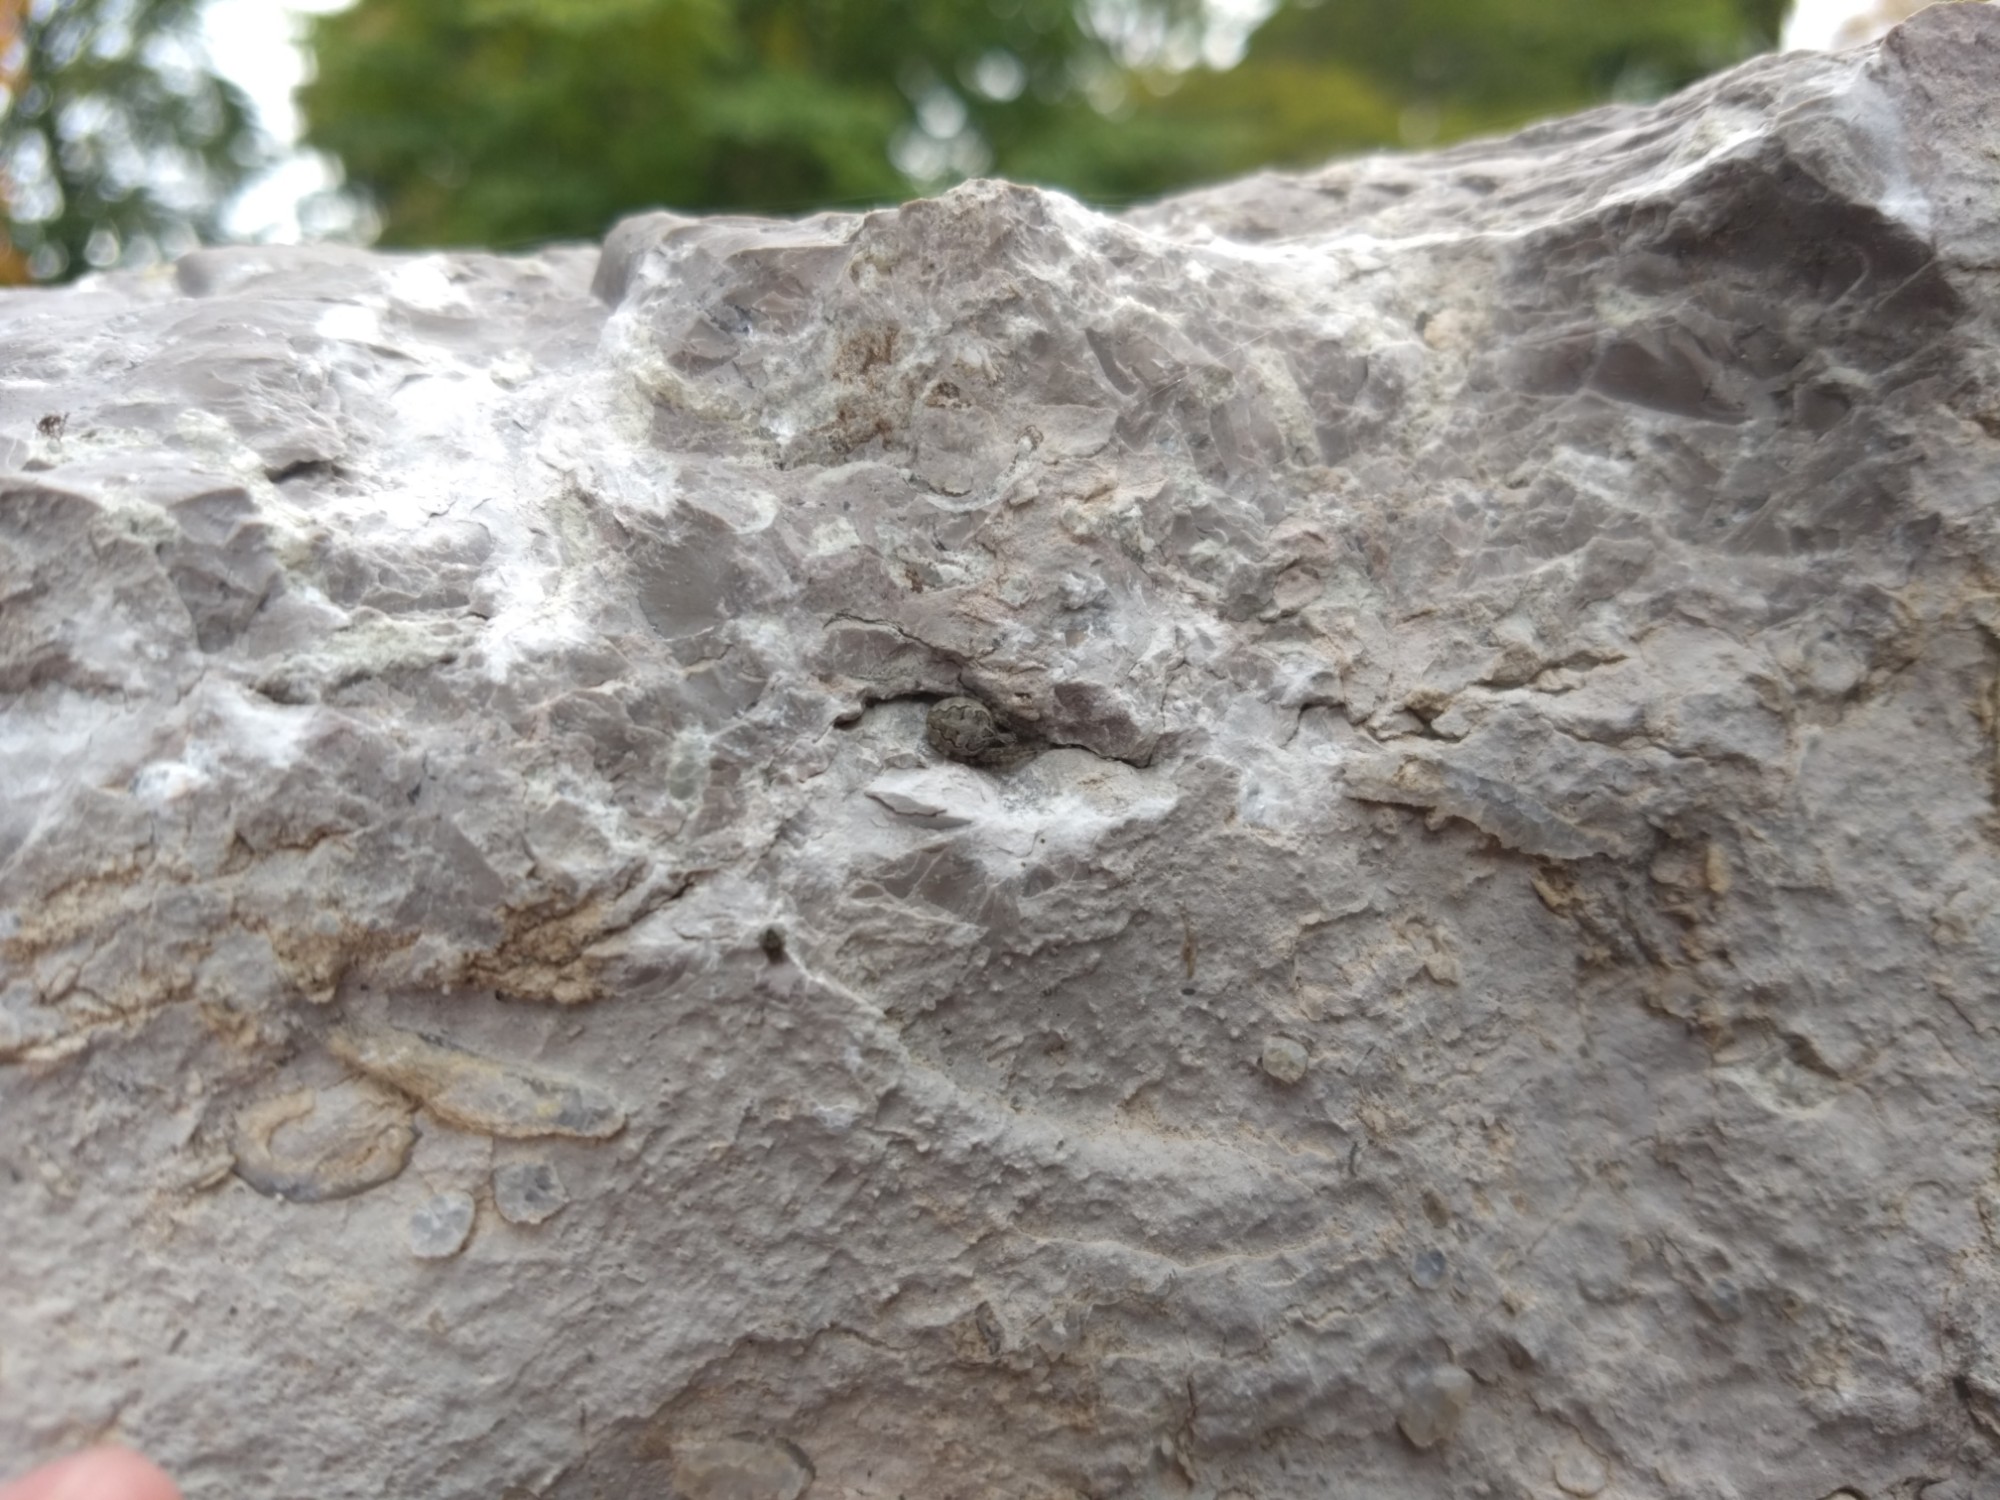 A large pale block of stone, with a small spider on it